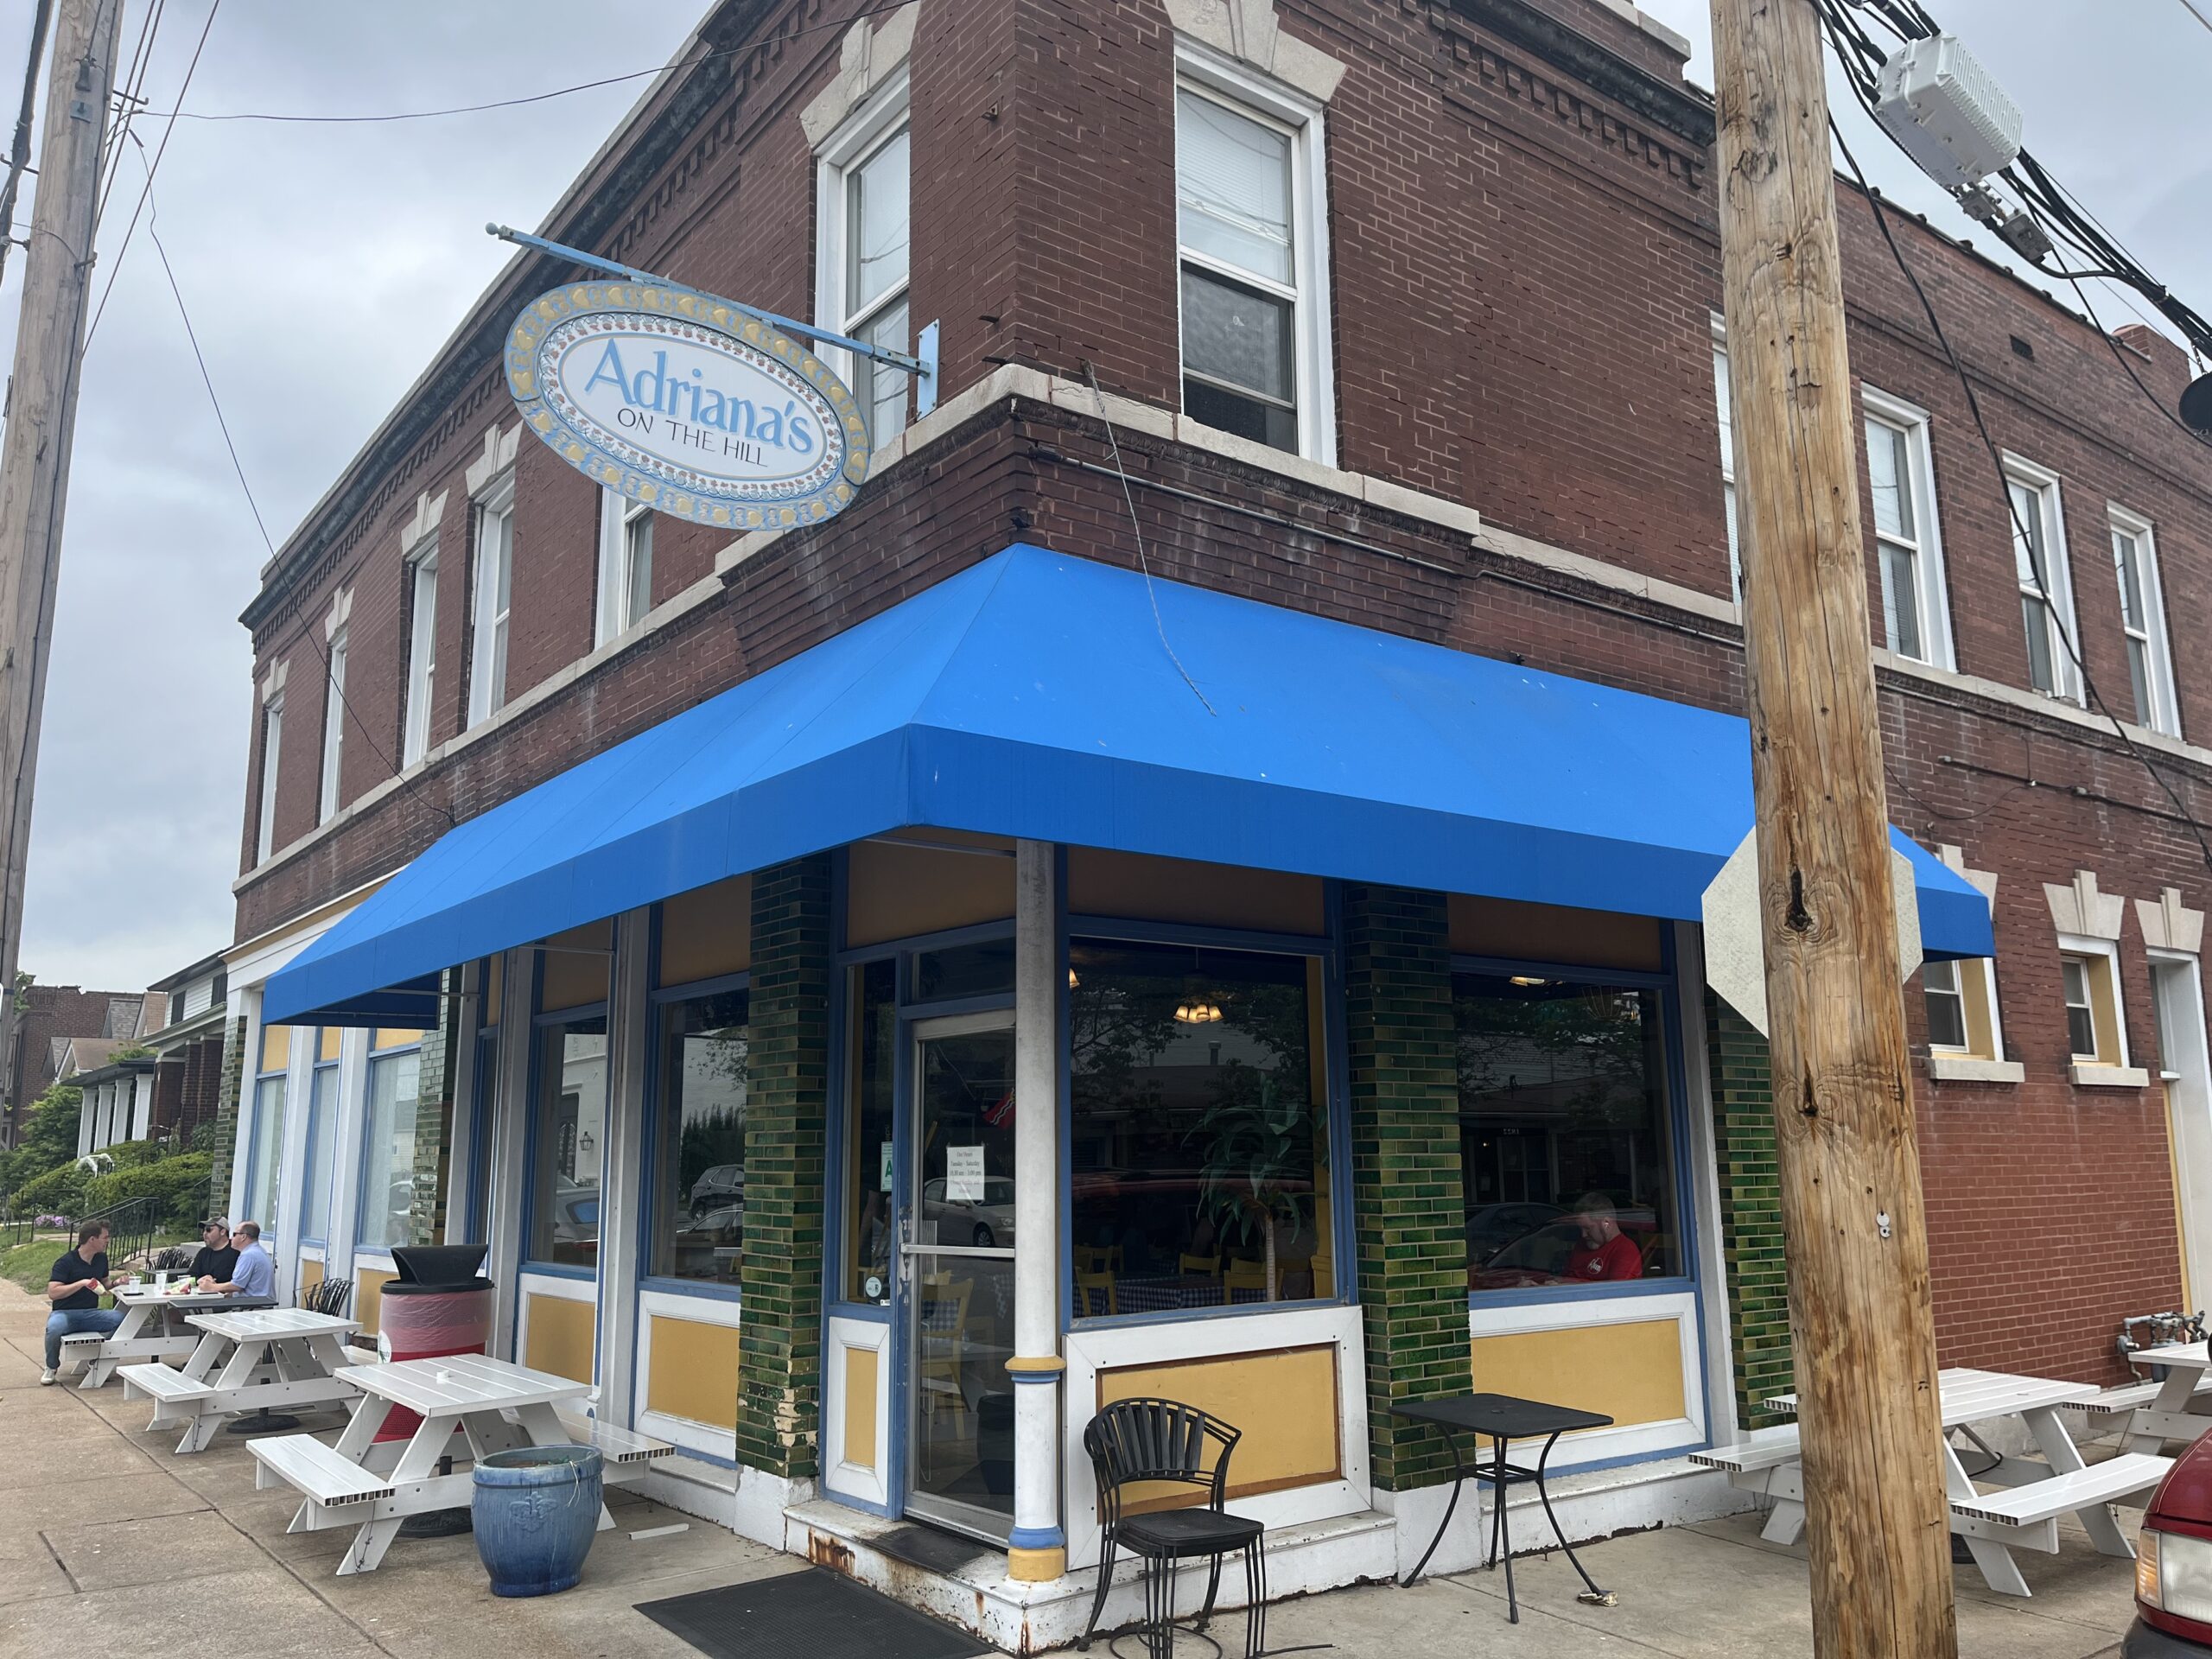 Adriana’s on the Hill – Restaurant Review – #1